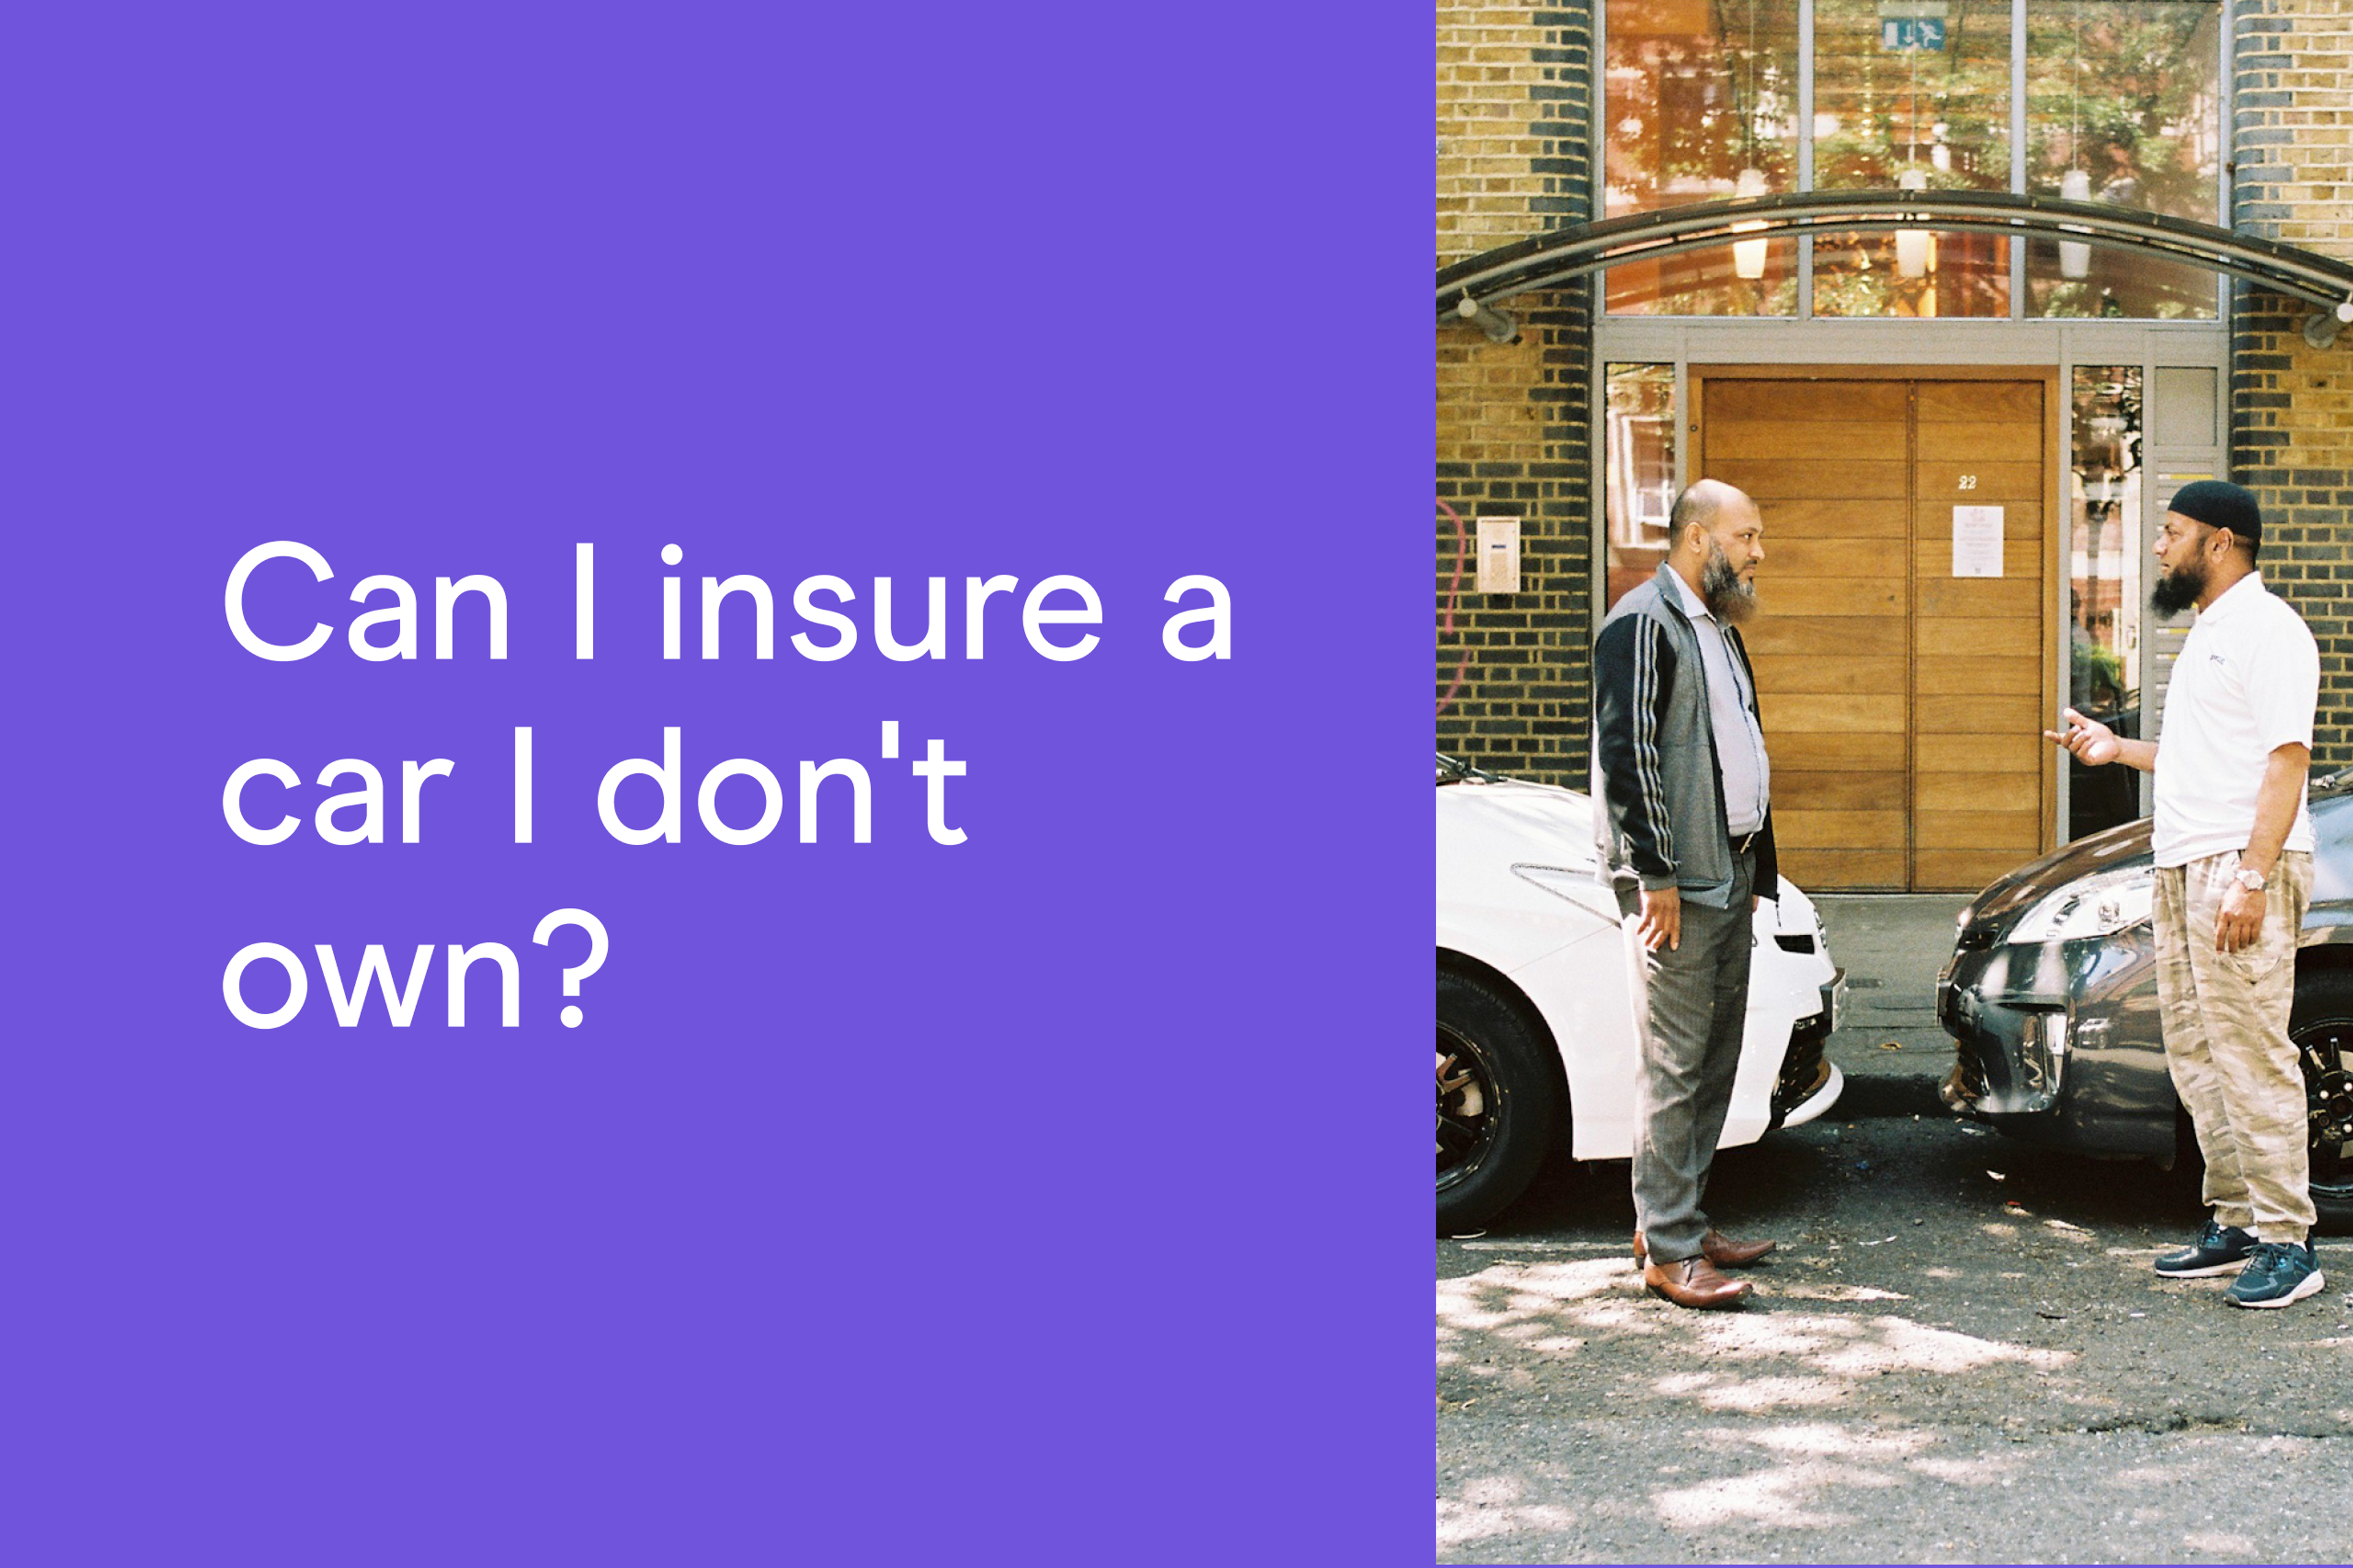 Can I insure a car I don't own?